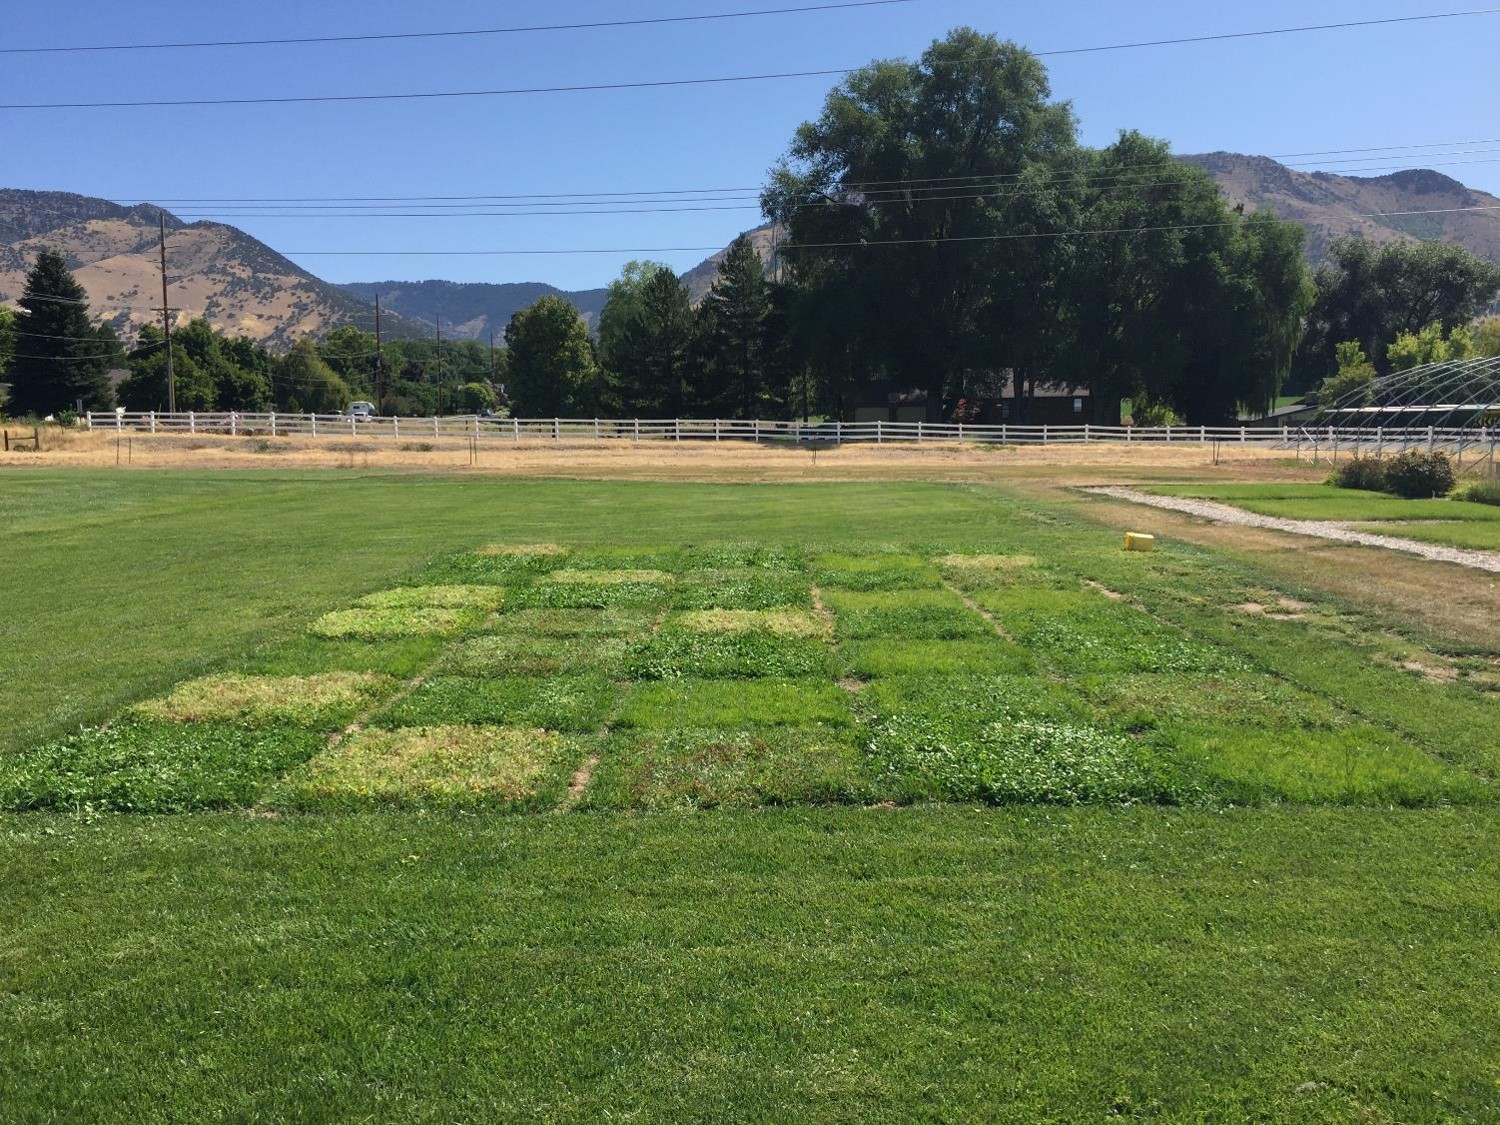 Field research plots with turfgrass and clover plants; mountains are in the background